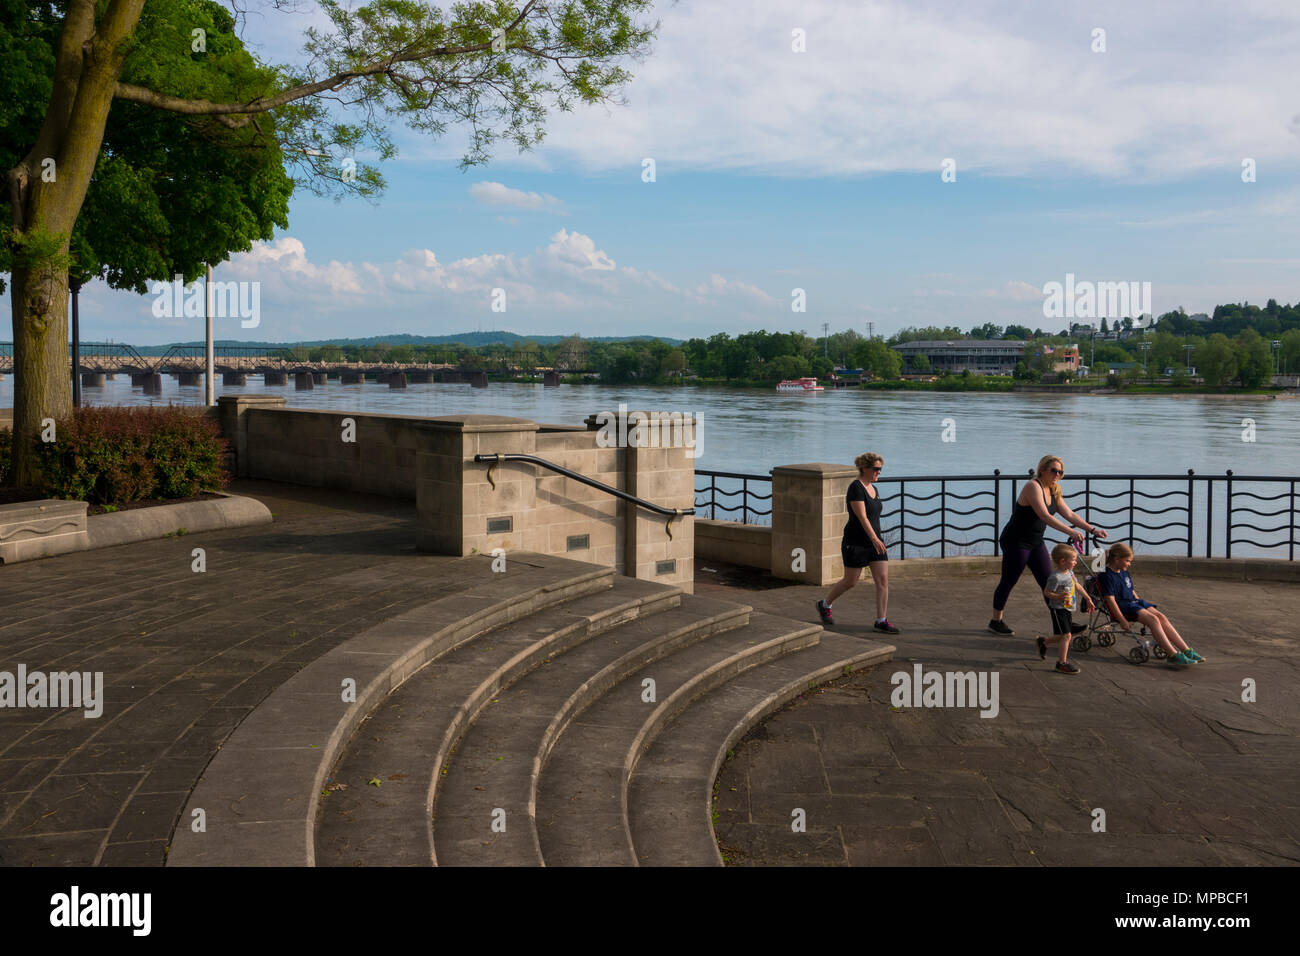 USA Pennsylvania PA Harrisburg state capitol people enjoying the riverfront walk on a summer evening along the Susquehanna River Stock Photo